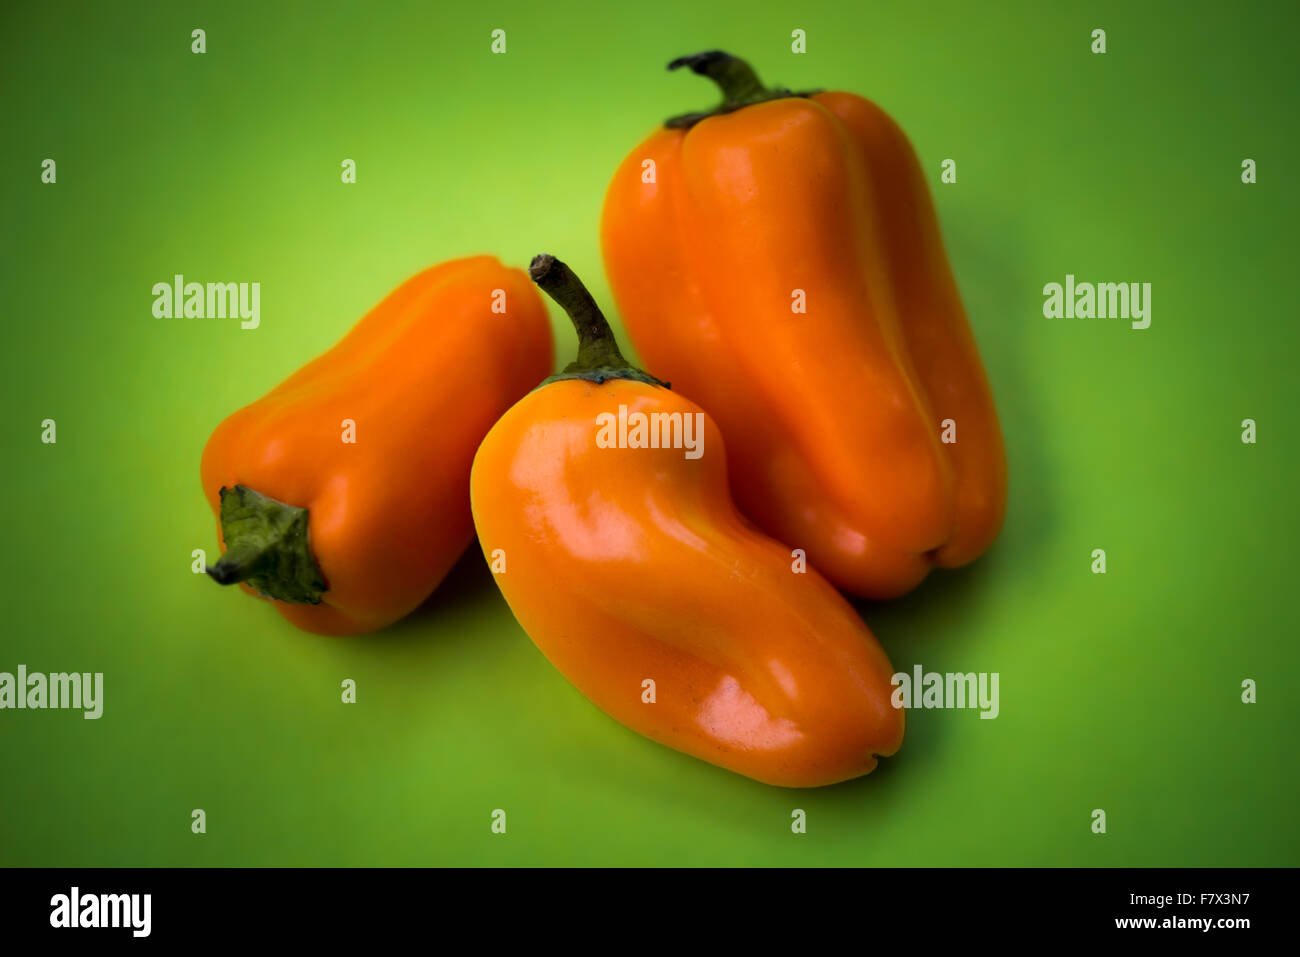 Orange bell peppers on green background Stock Photo